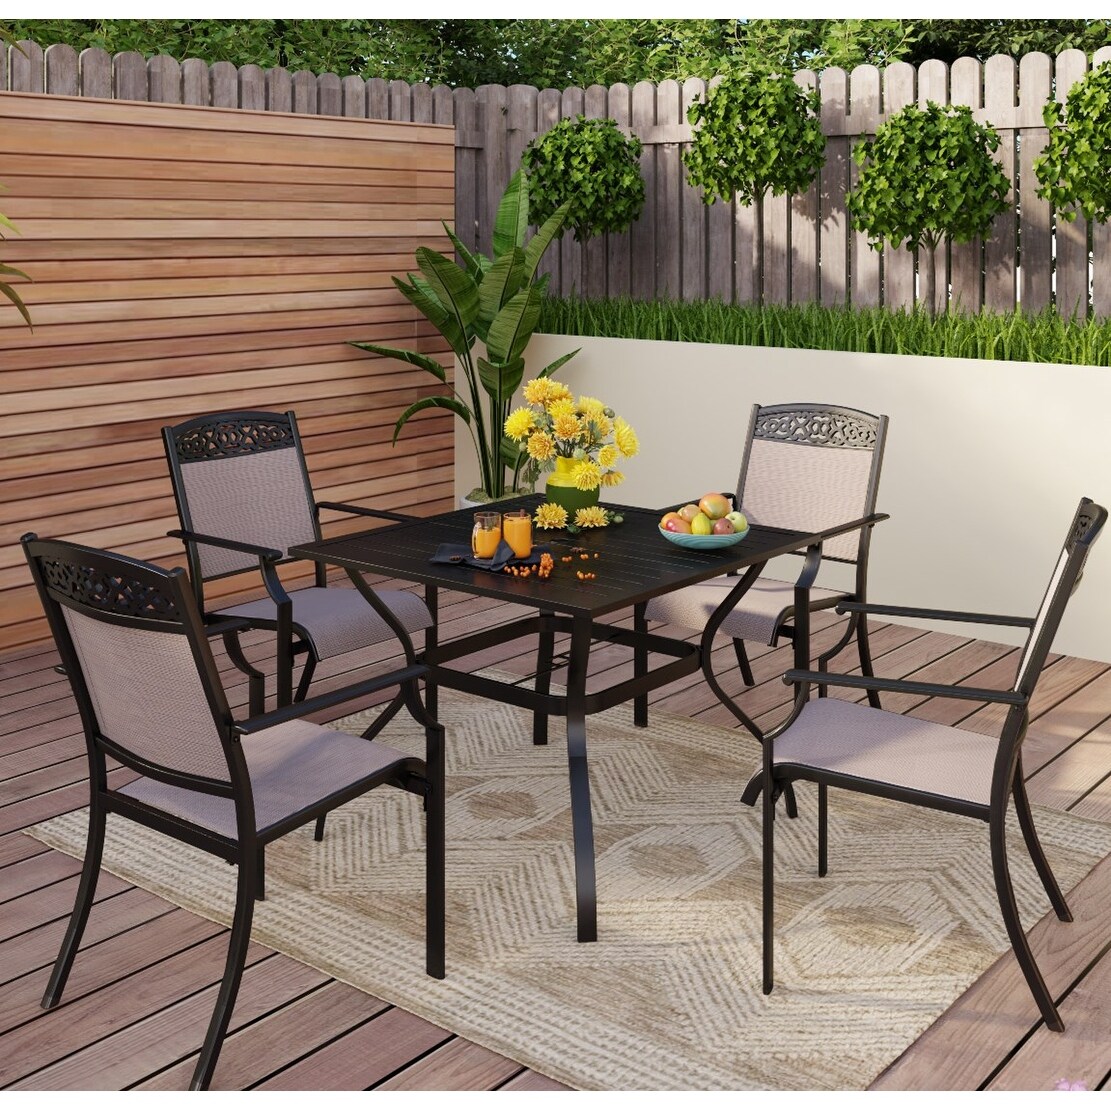 Phi Villa 5/7-Piece Cast Aluminum Patio Dining Set wtih Stackle or Swivel Chairs and 1 Metal Table 4StackableChair - image 1 of 5